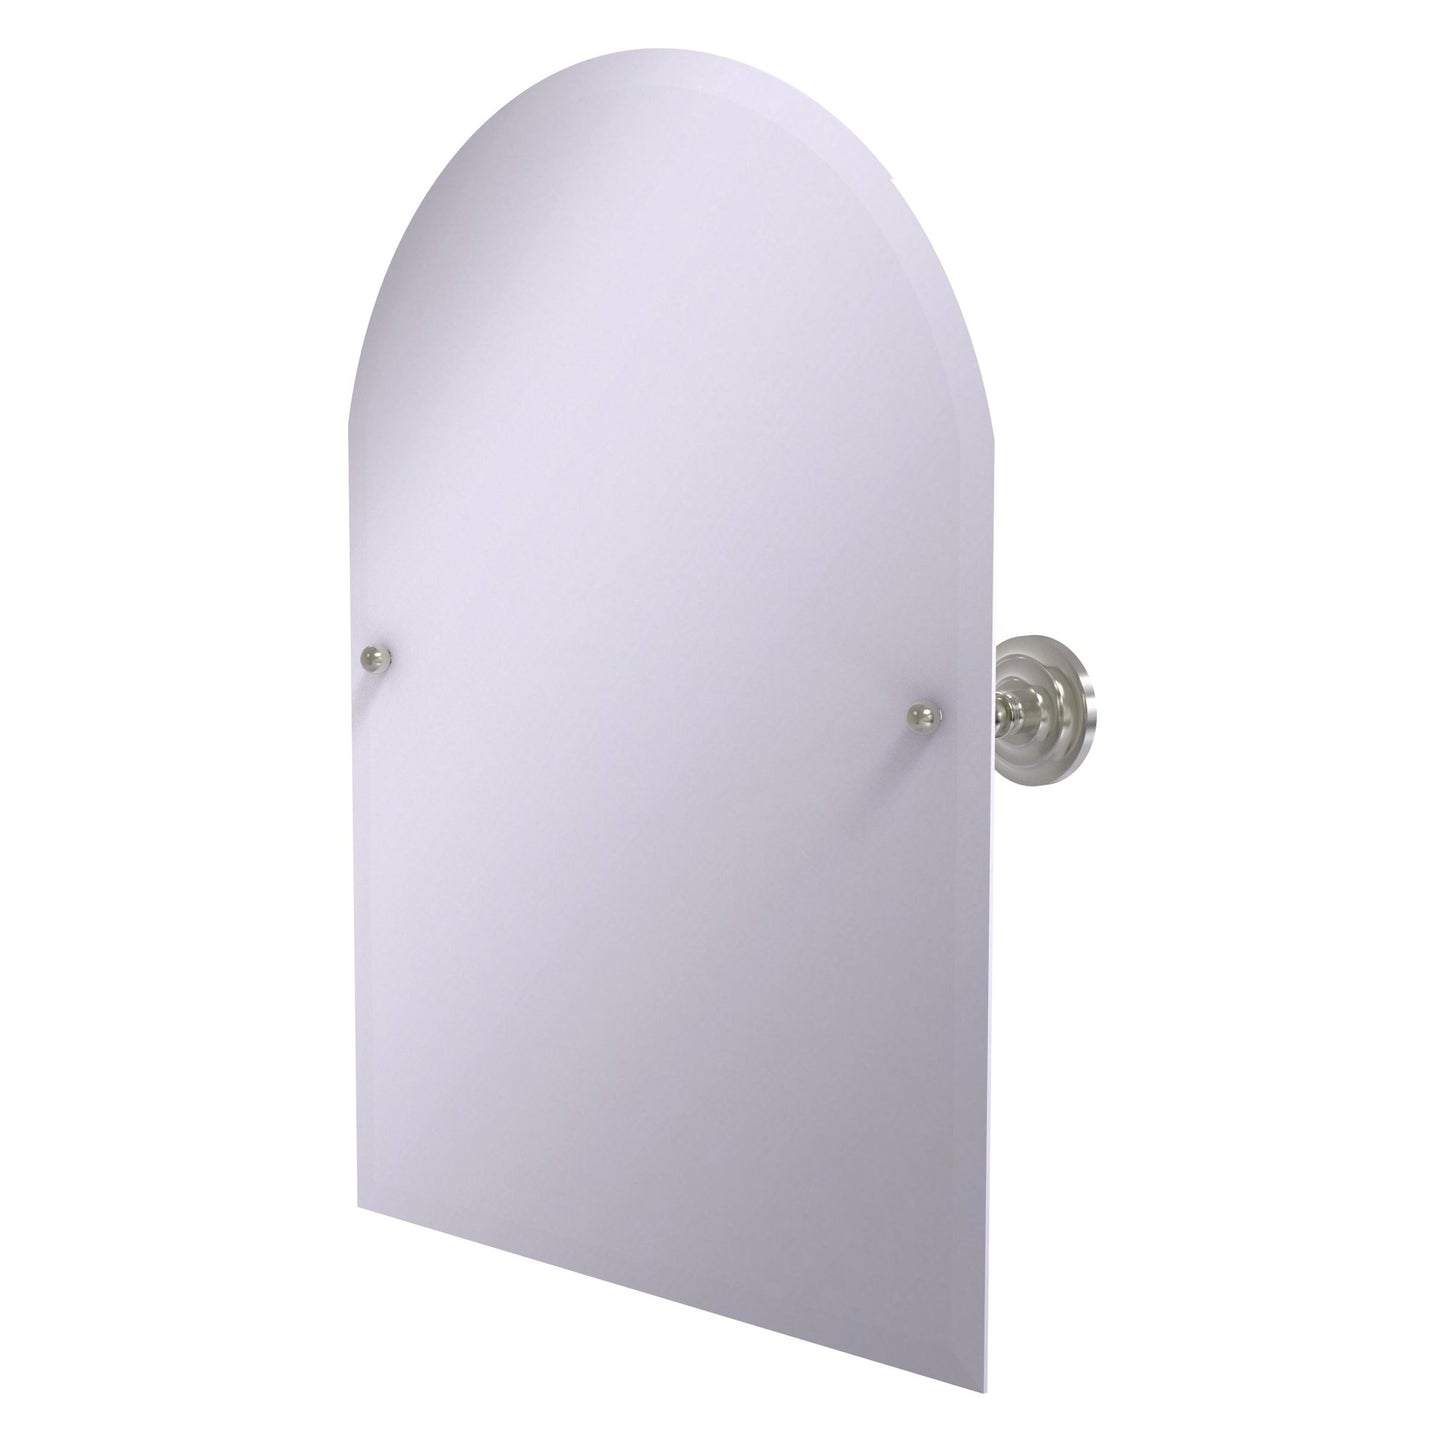 Allied Brass Prestige Que New 21" x 26" Satin Nickel Solid Brass Frameless Arched Top Tilt Mirror With Beveled Edge